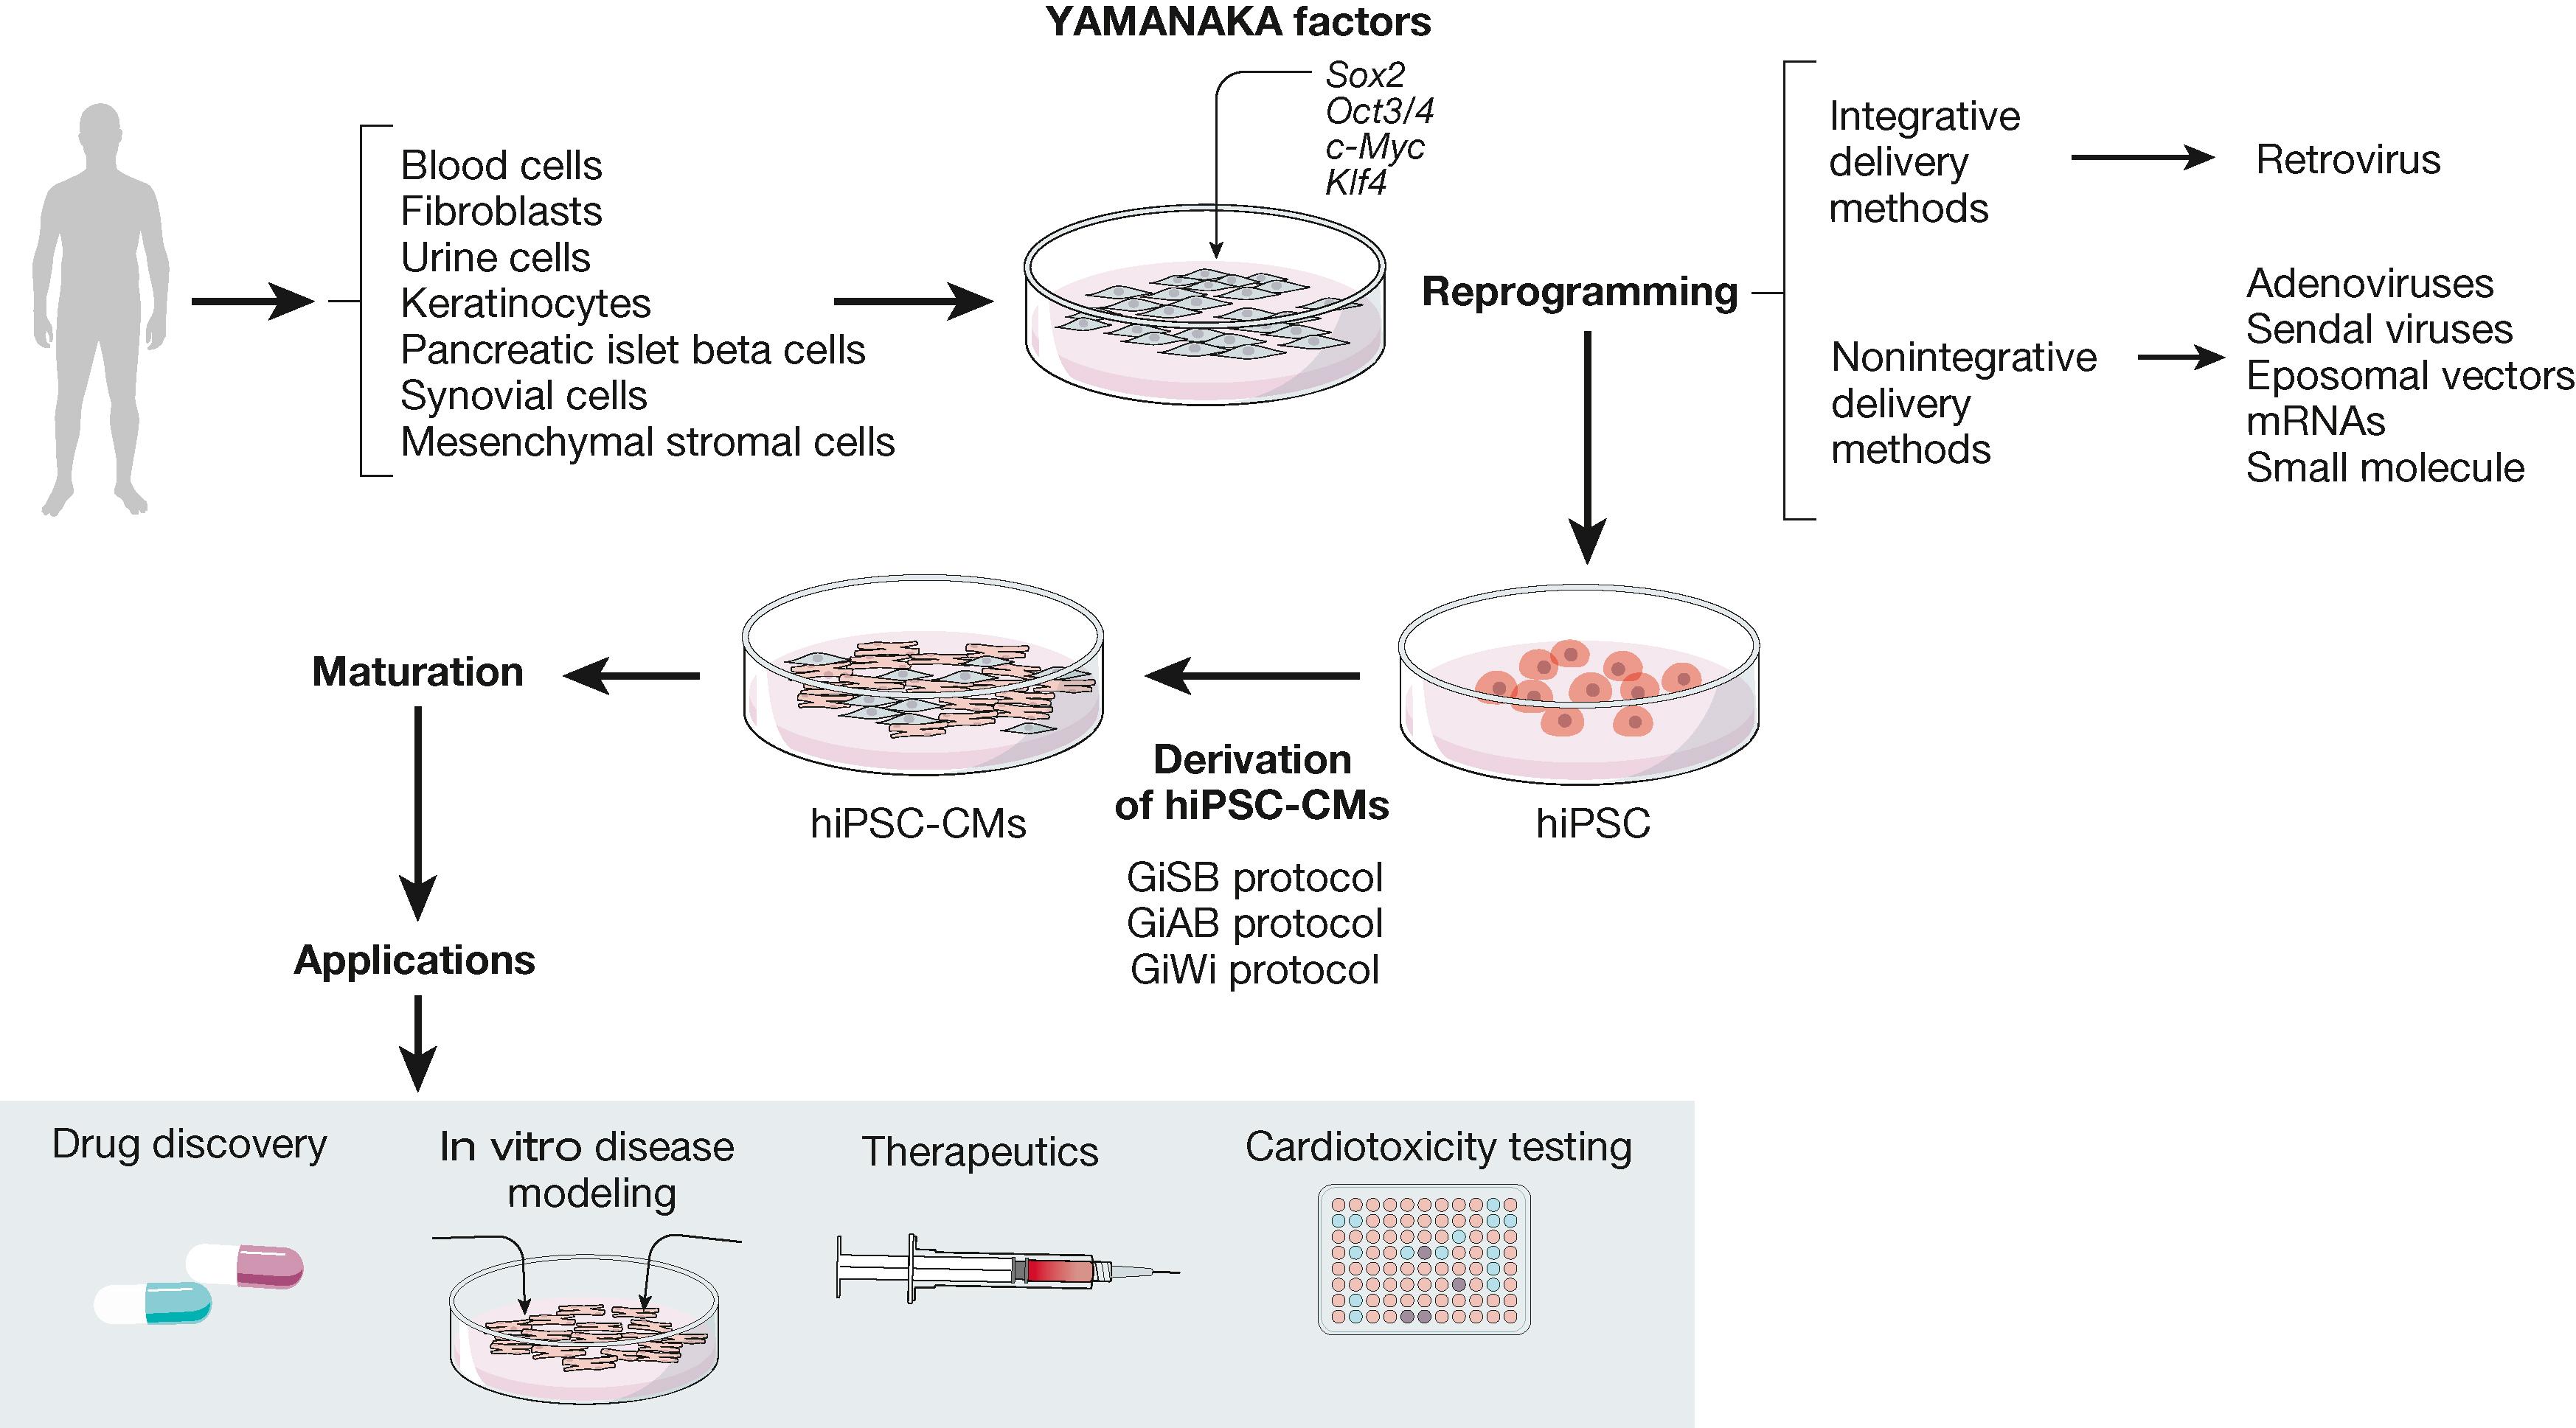 Fig. 59.1, Processes involved in the generation of hiPSC-CMs from human somatic cells and potential uses for in vitro disease modeling, drug discovery, therapeutics, and cardiotoxicity testing. hiPSC-CM, Human-induced pluripotent stem cell–derived cardiomyocyte.